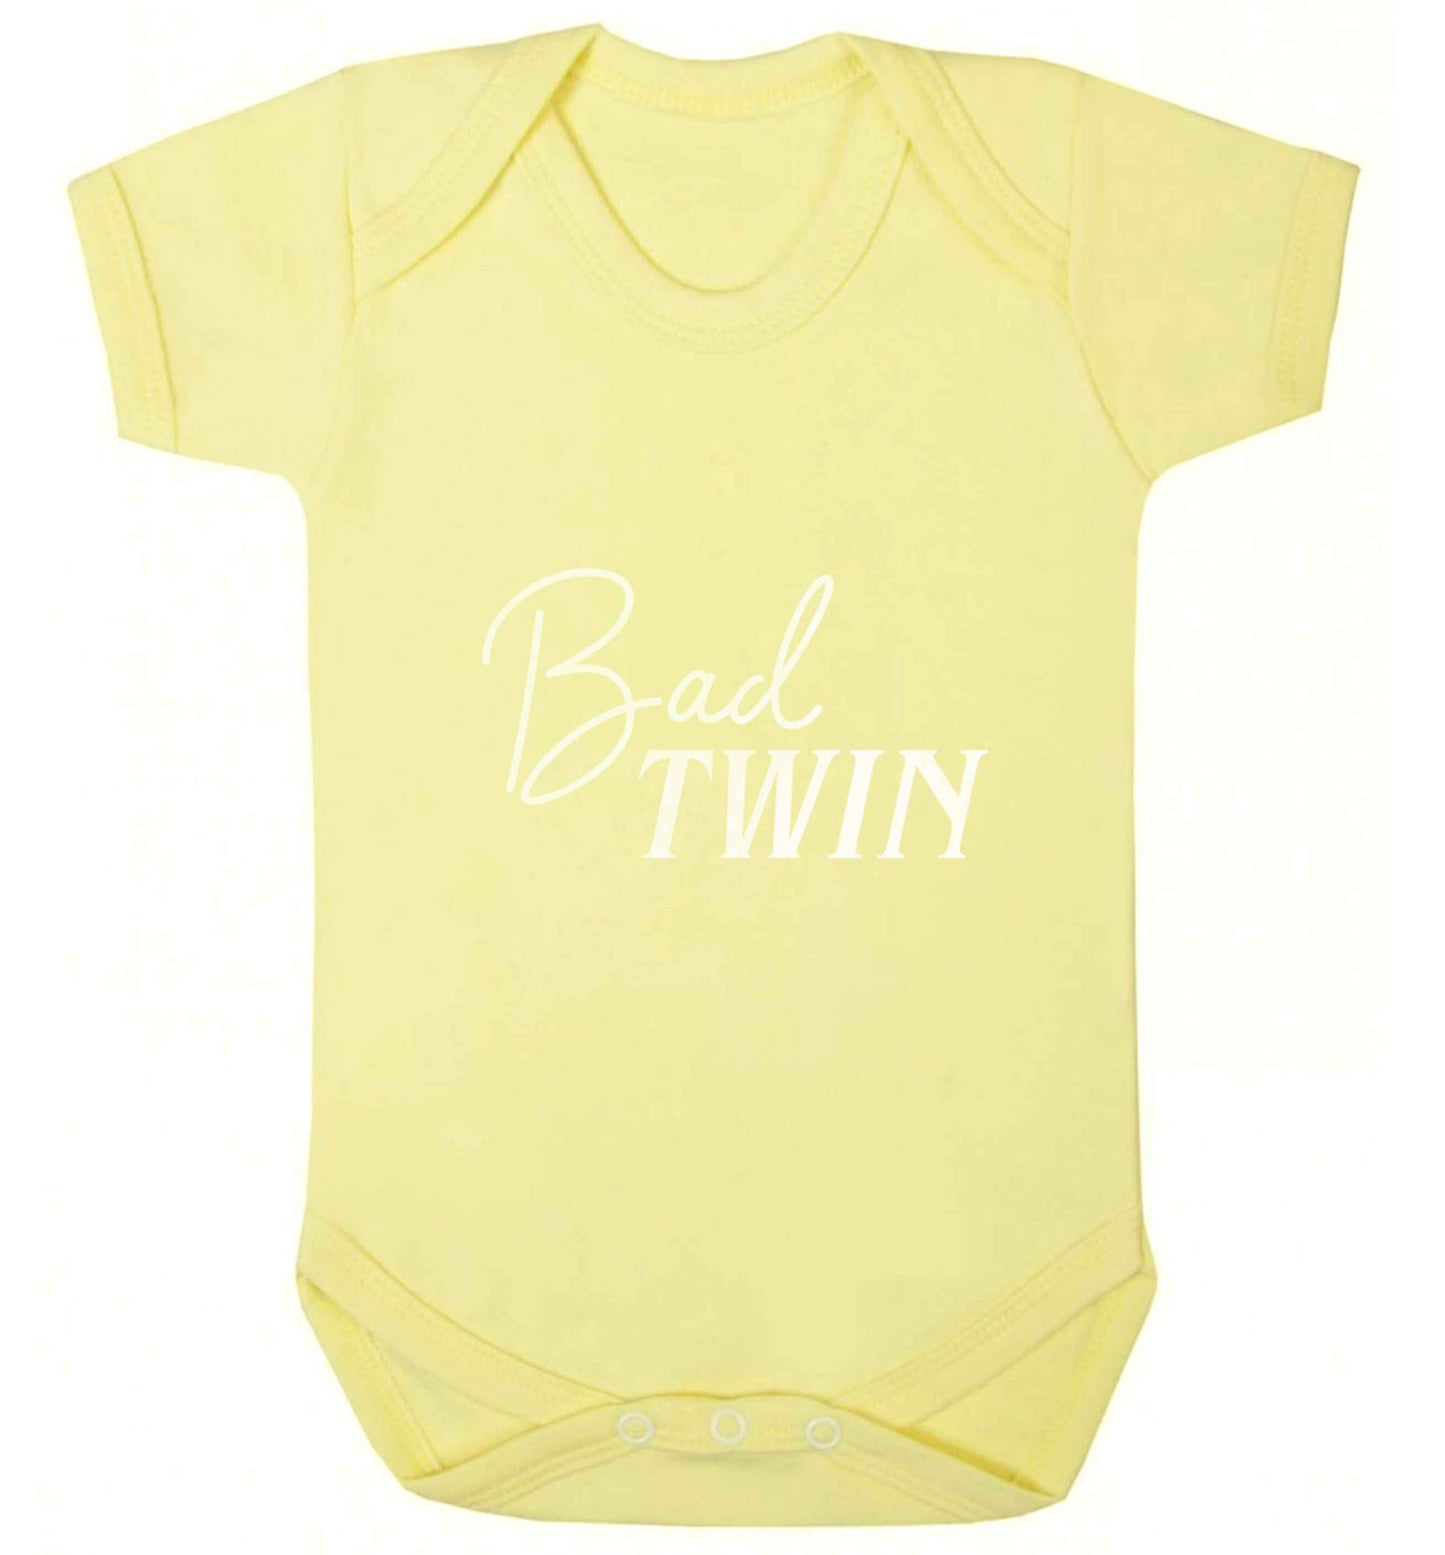 Bad twin baby vest pale yellow 18-24 months